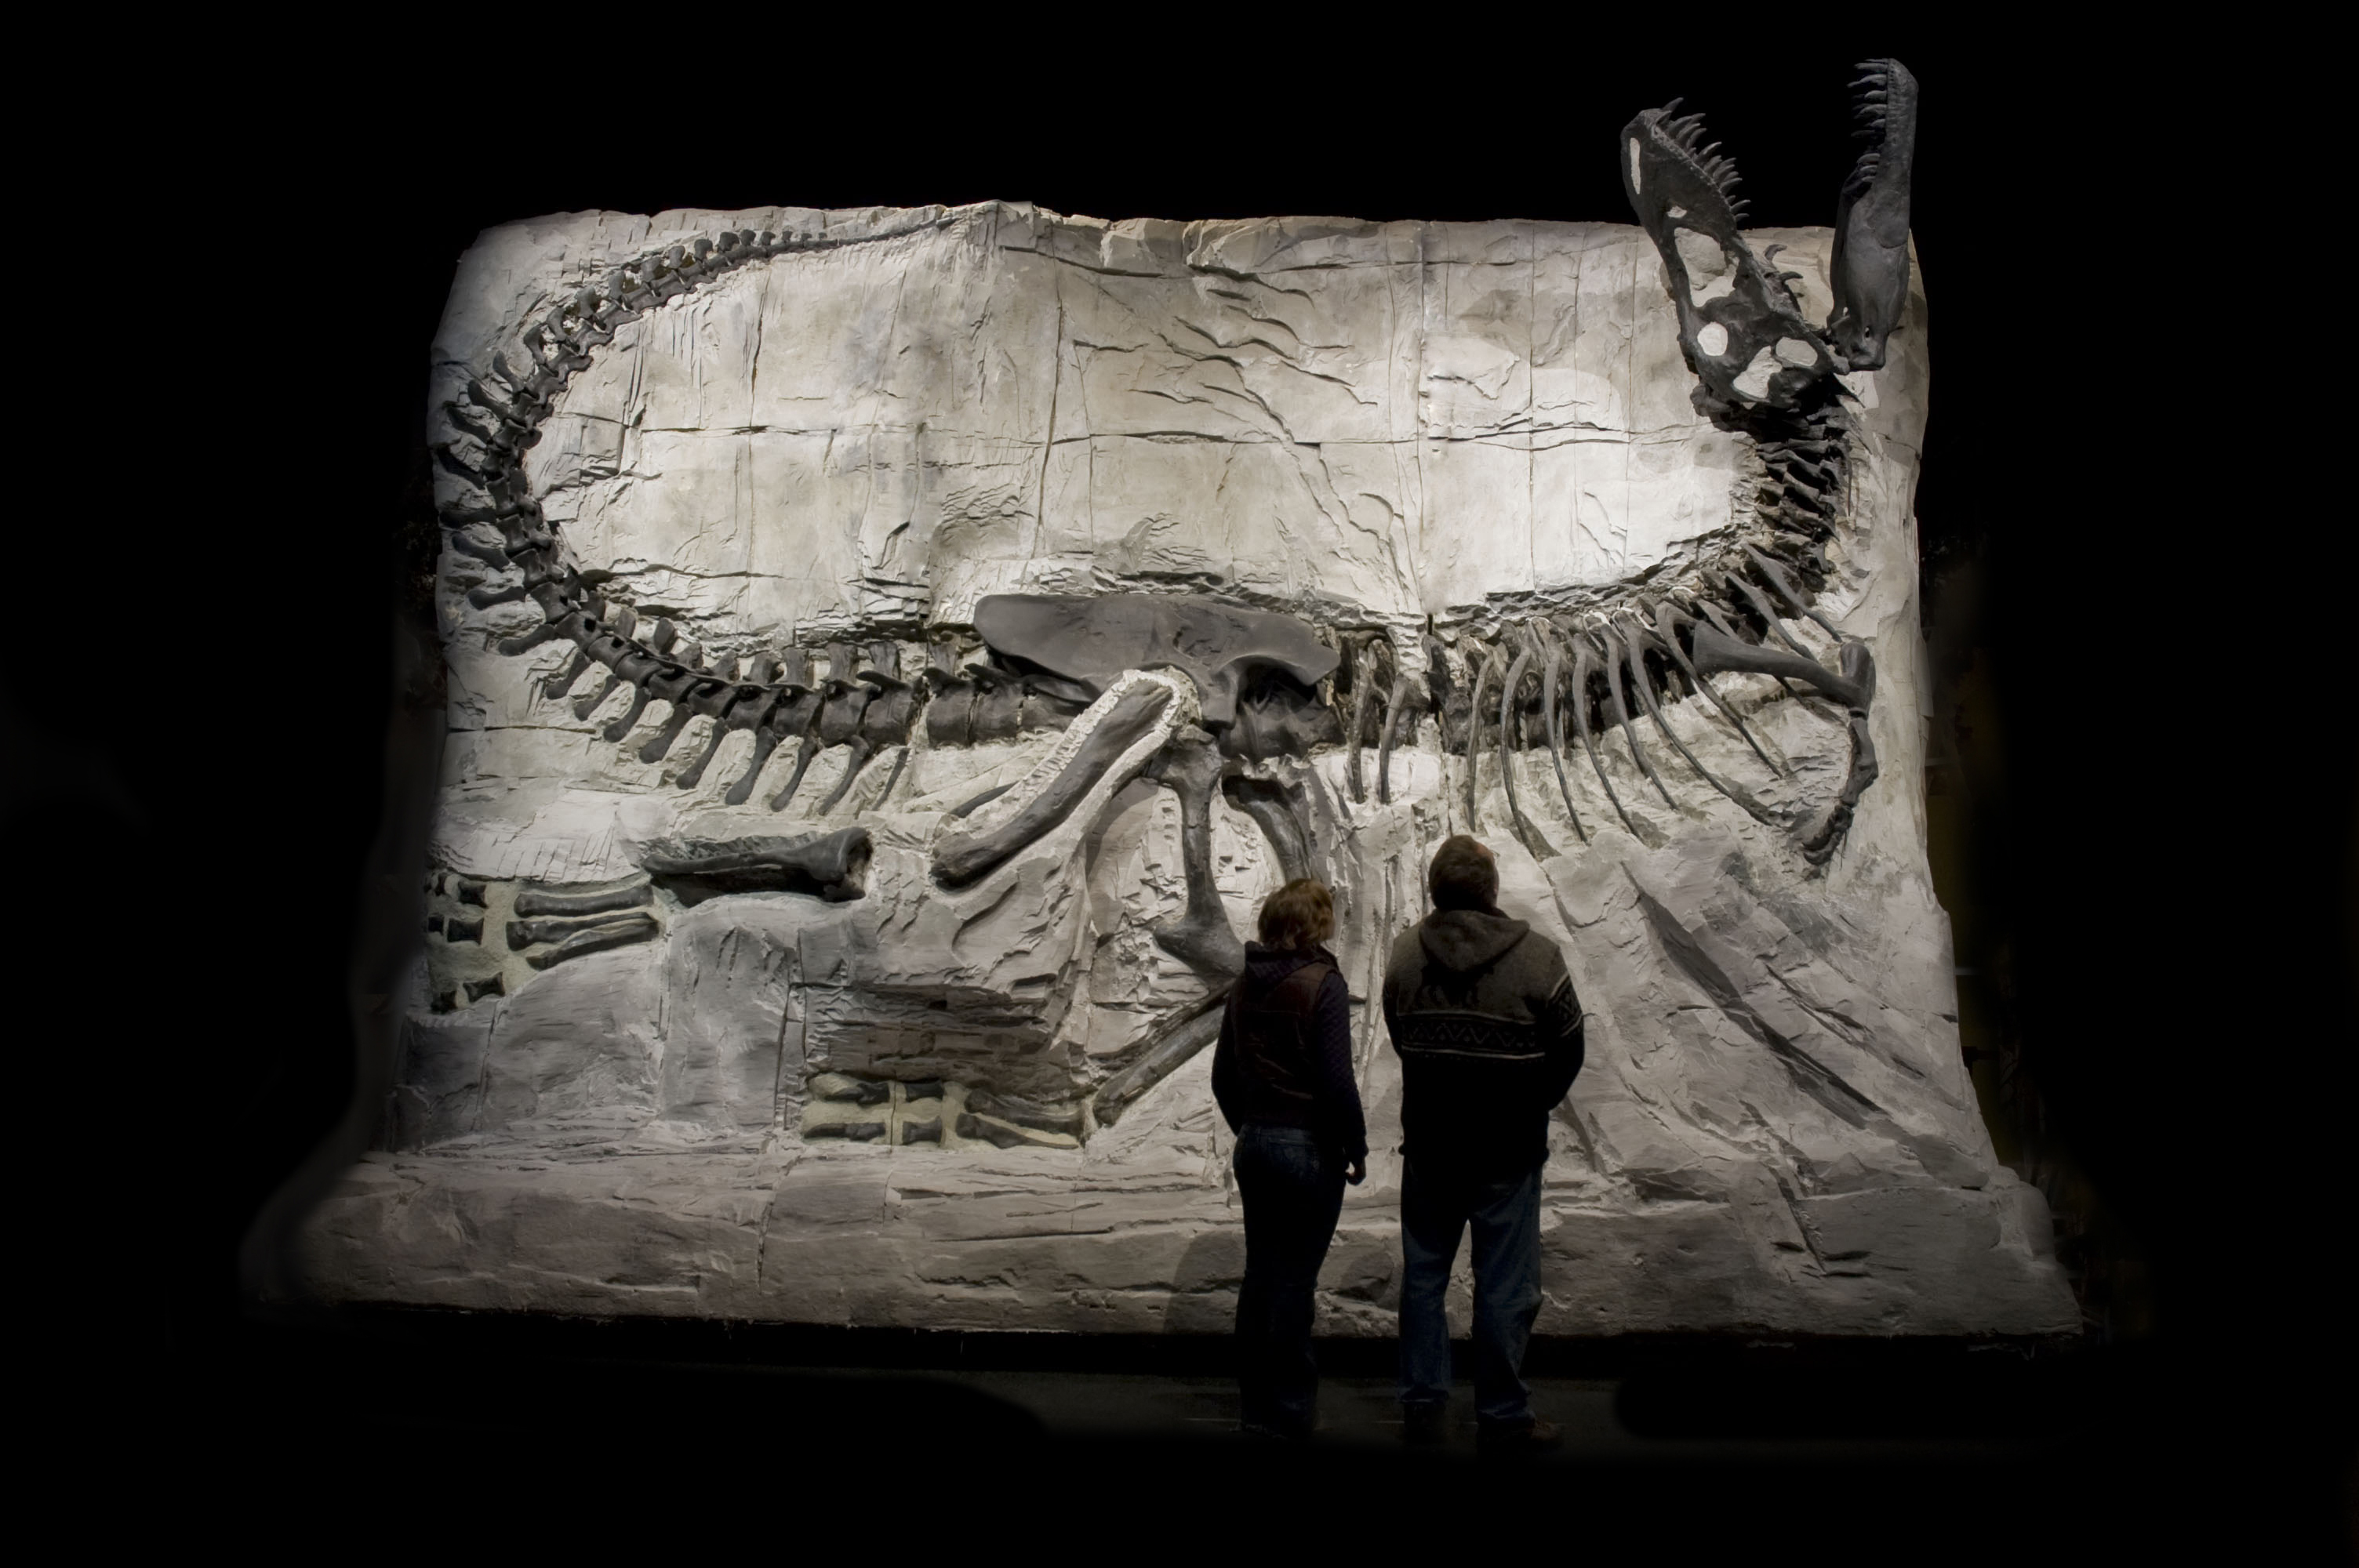 People look at a dinosaur fossil at the Royal Tyrrel Museum